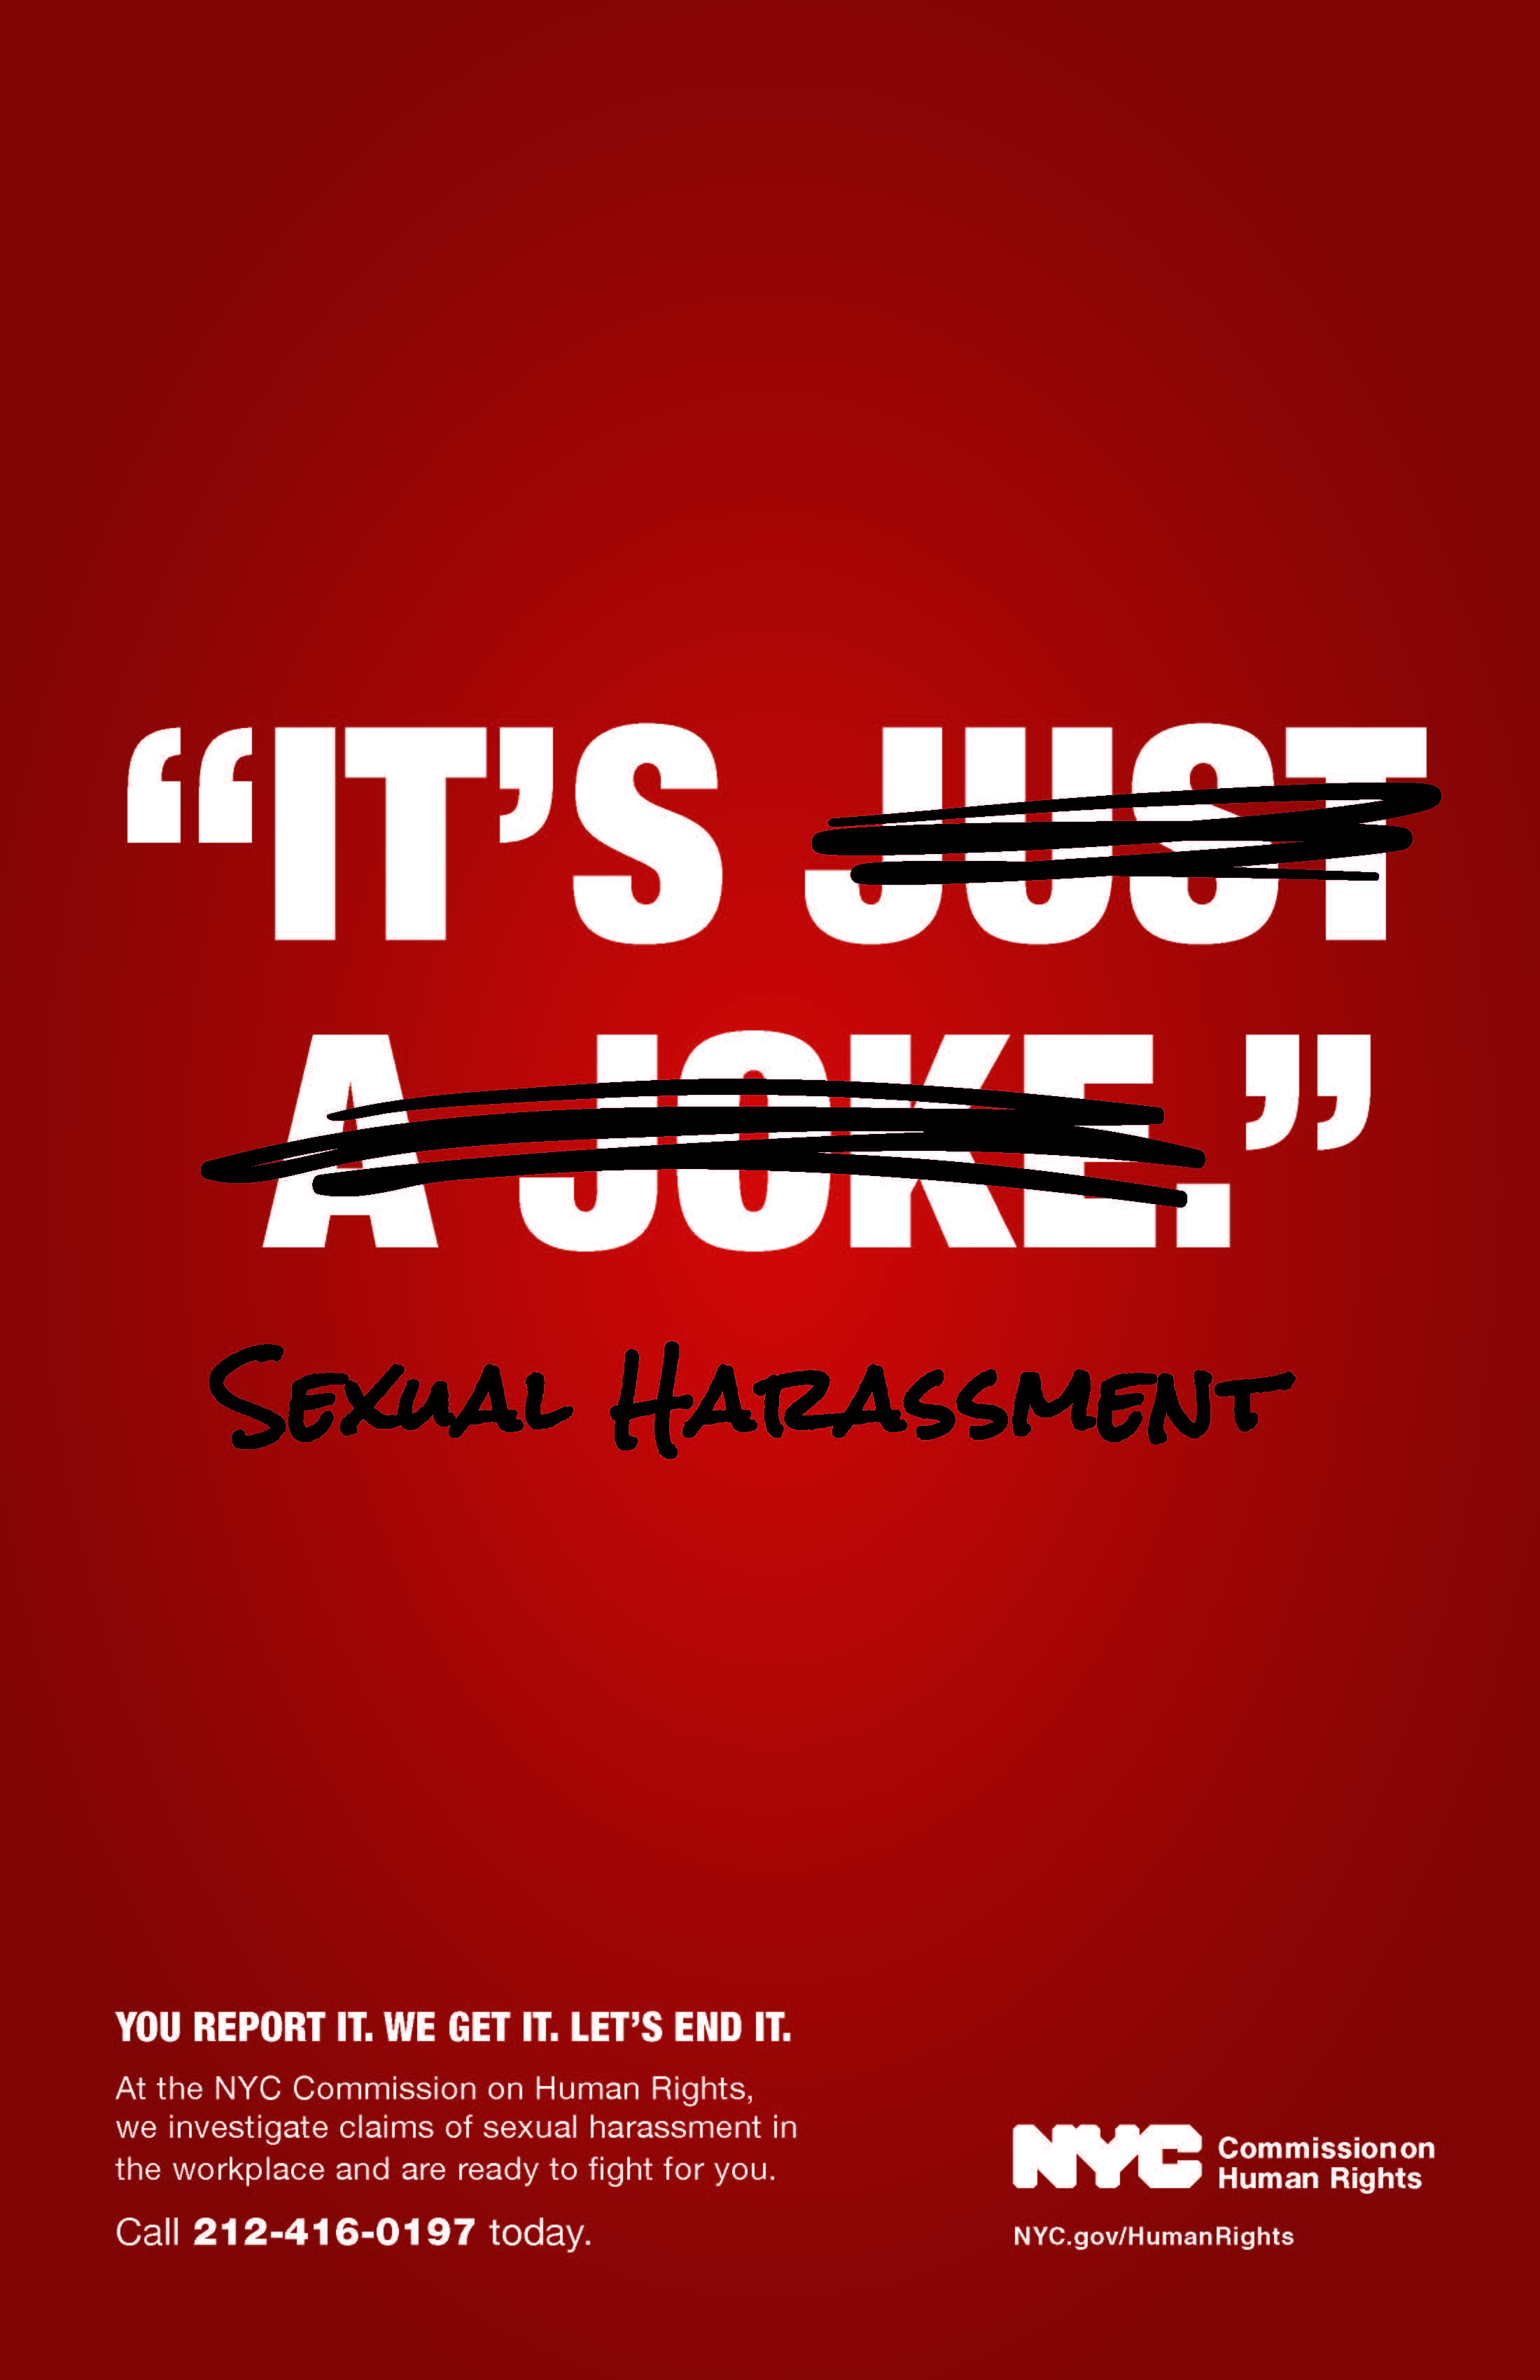 harassment sexual nyc workplace rights human campaign joke hi advertisements resolution